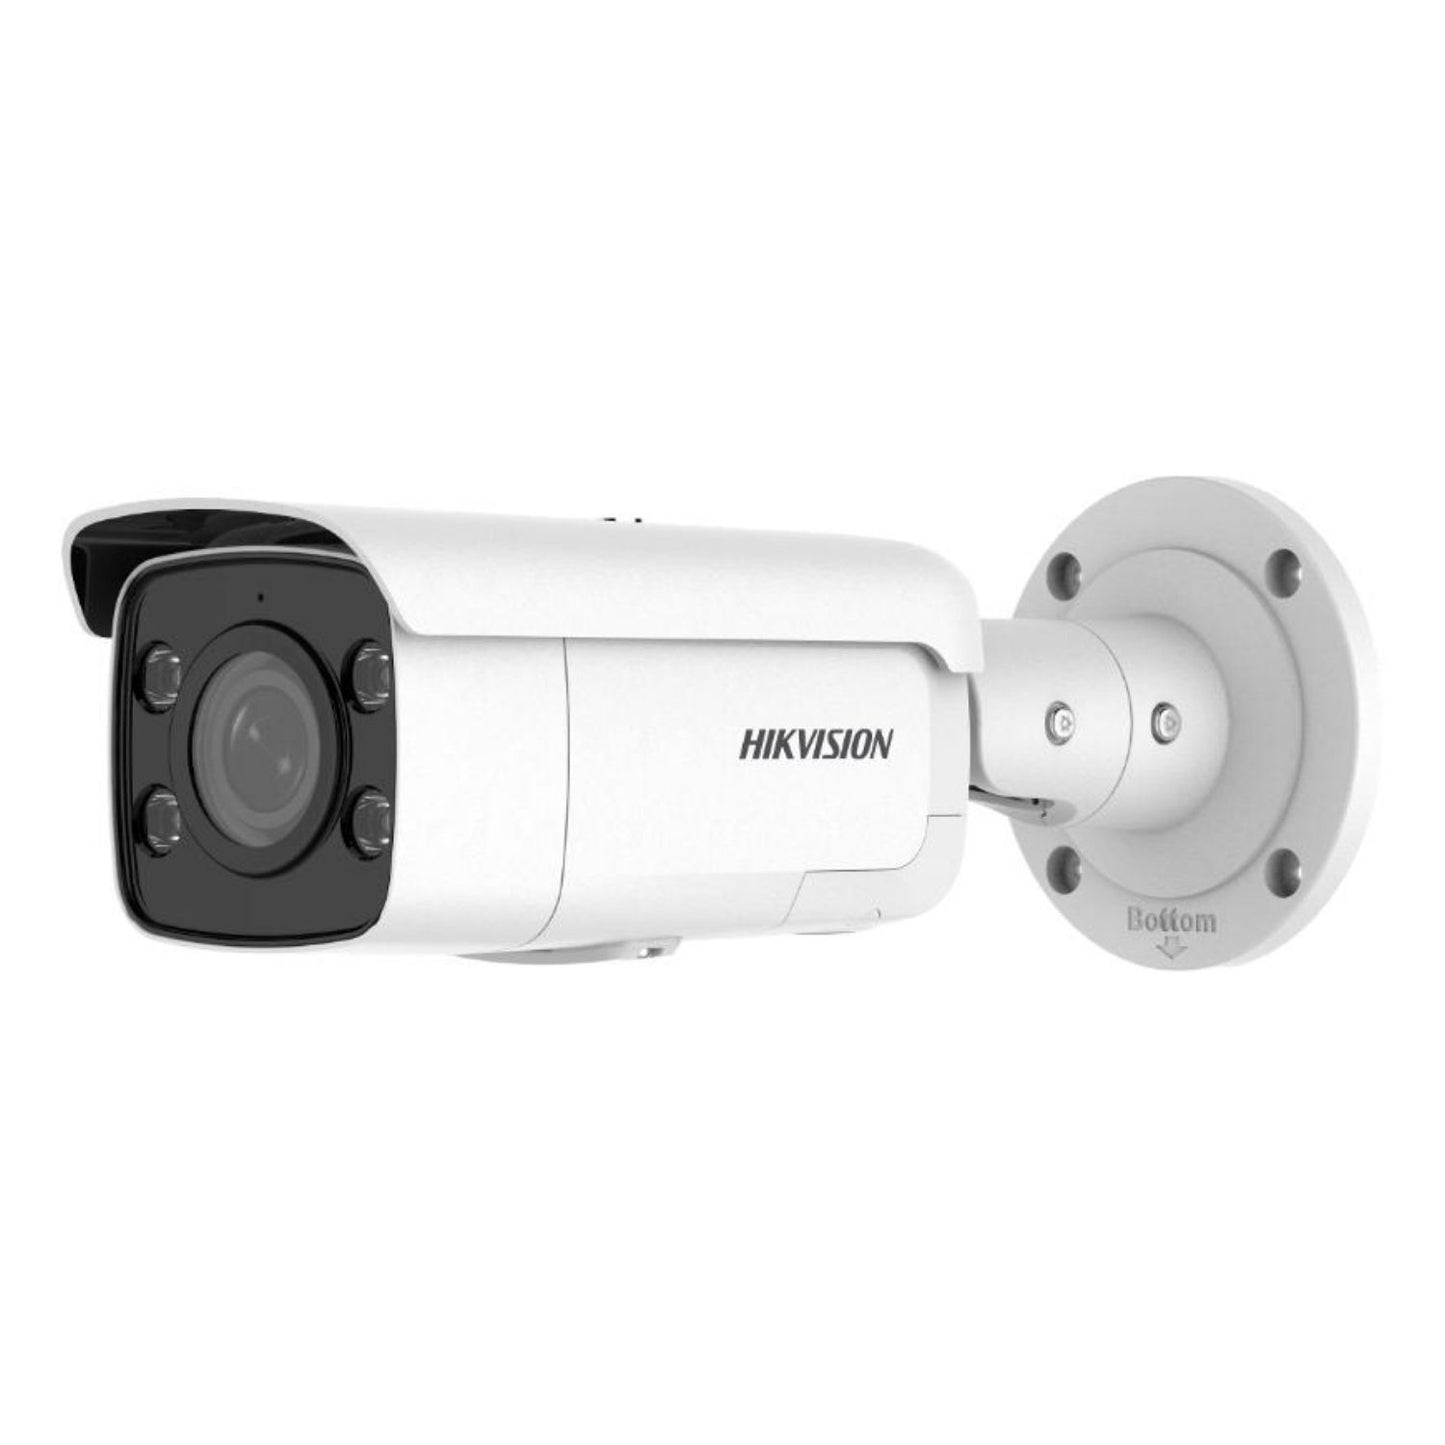 DS-2CD2T87G2-LSU/SL(4mm) - 8 MP ColorVu Strobe Light and Audible Warning Fixed Bullet Network Camera